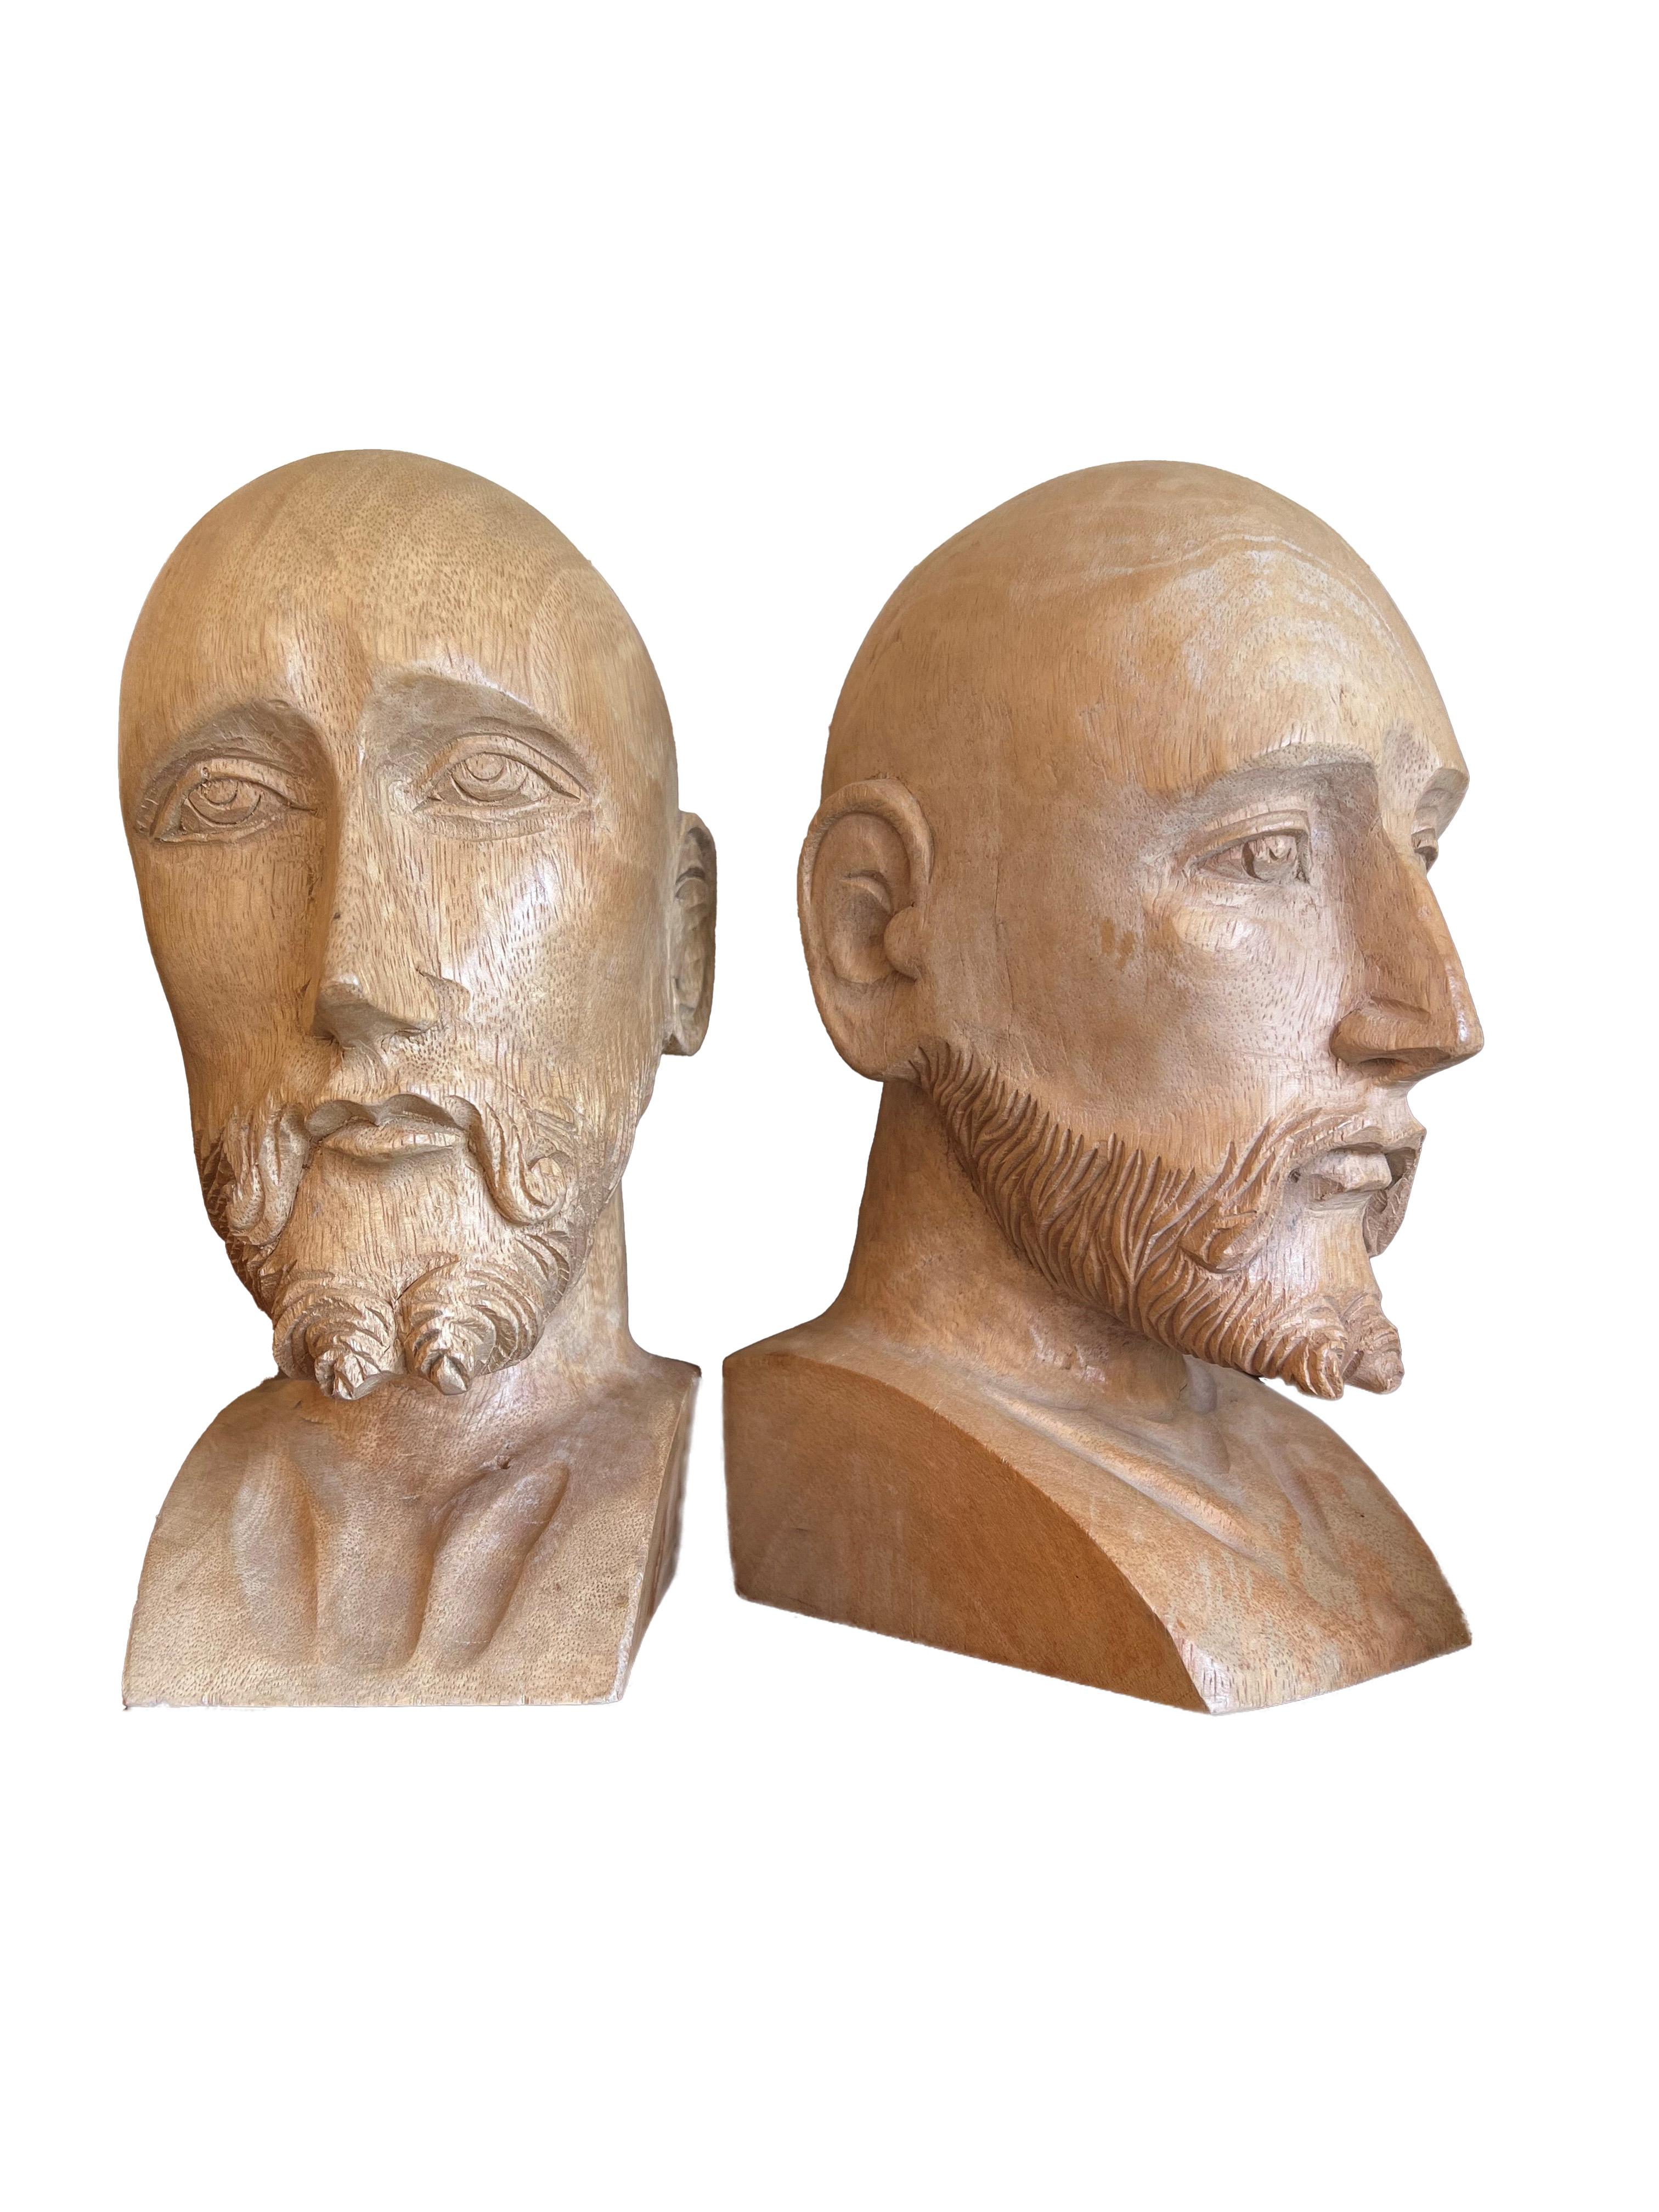 Delve into the realm of exquisite craftsmanship and timeless artistry with this remarkable pair of hand-carved distinguished gentlemen. Each bust, unique in its depiction, captures the essence of character and sophistication through the masterful